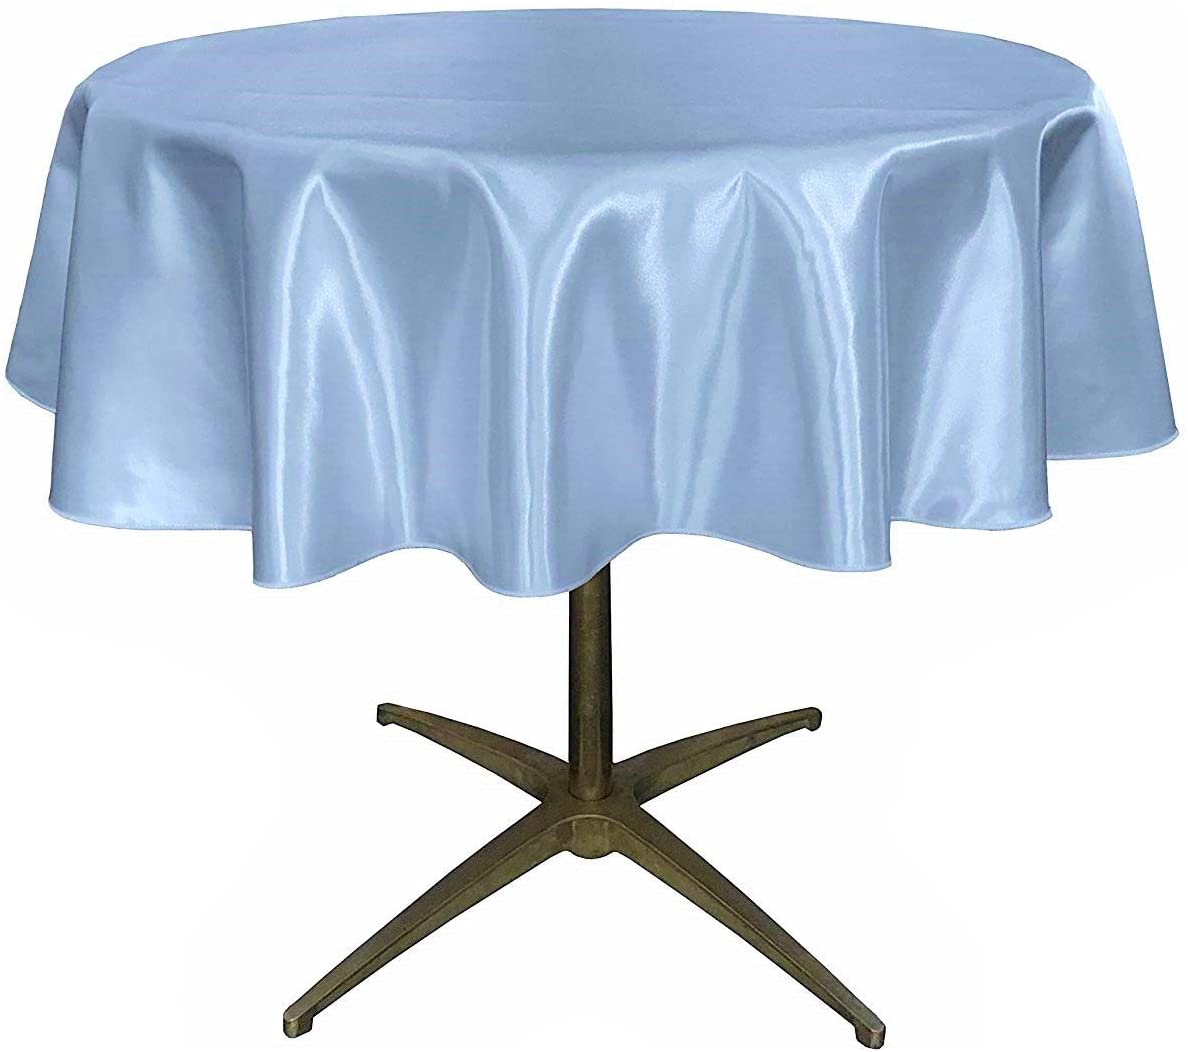 Bridal Satin Table Overlay, for Small Coffee Table (Light Blue,